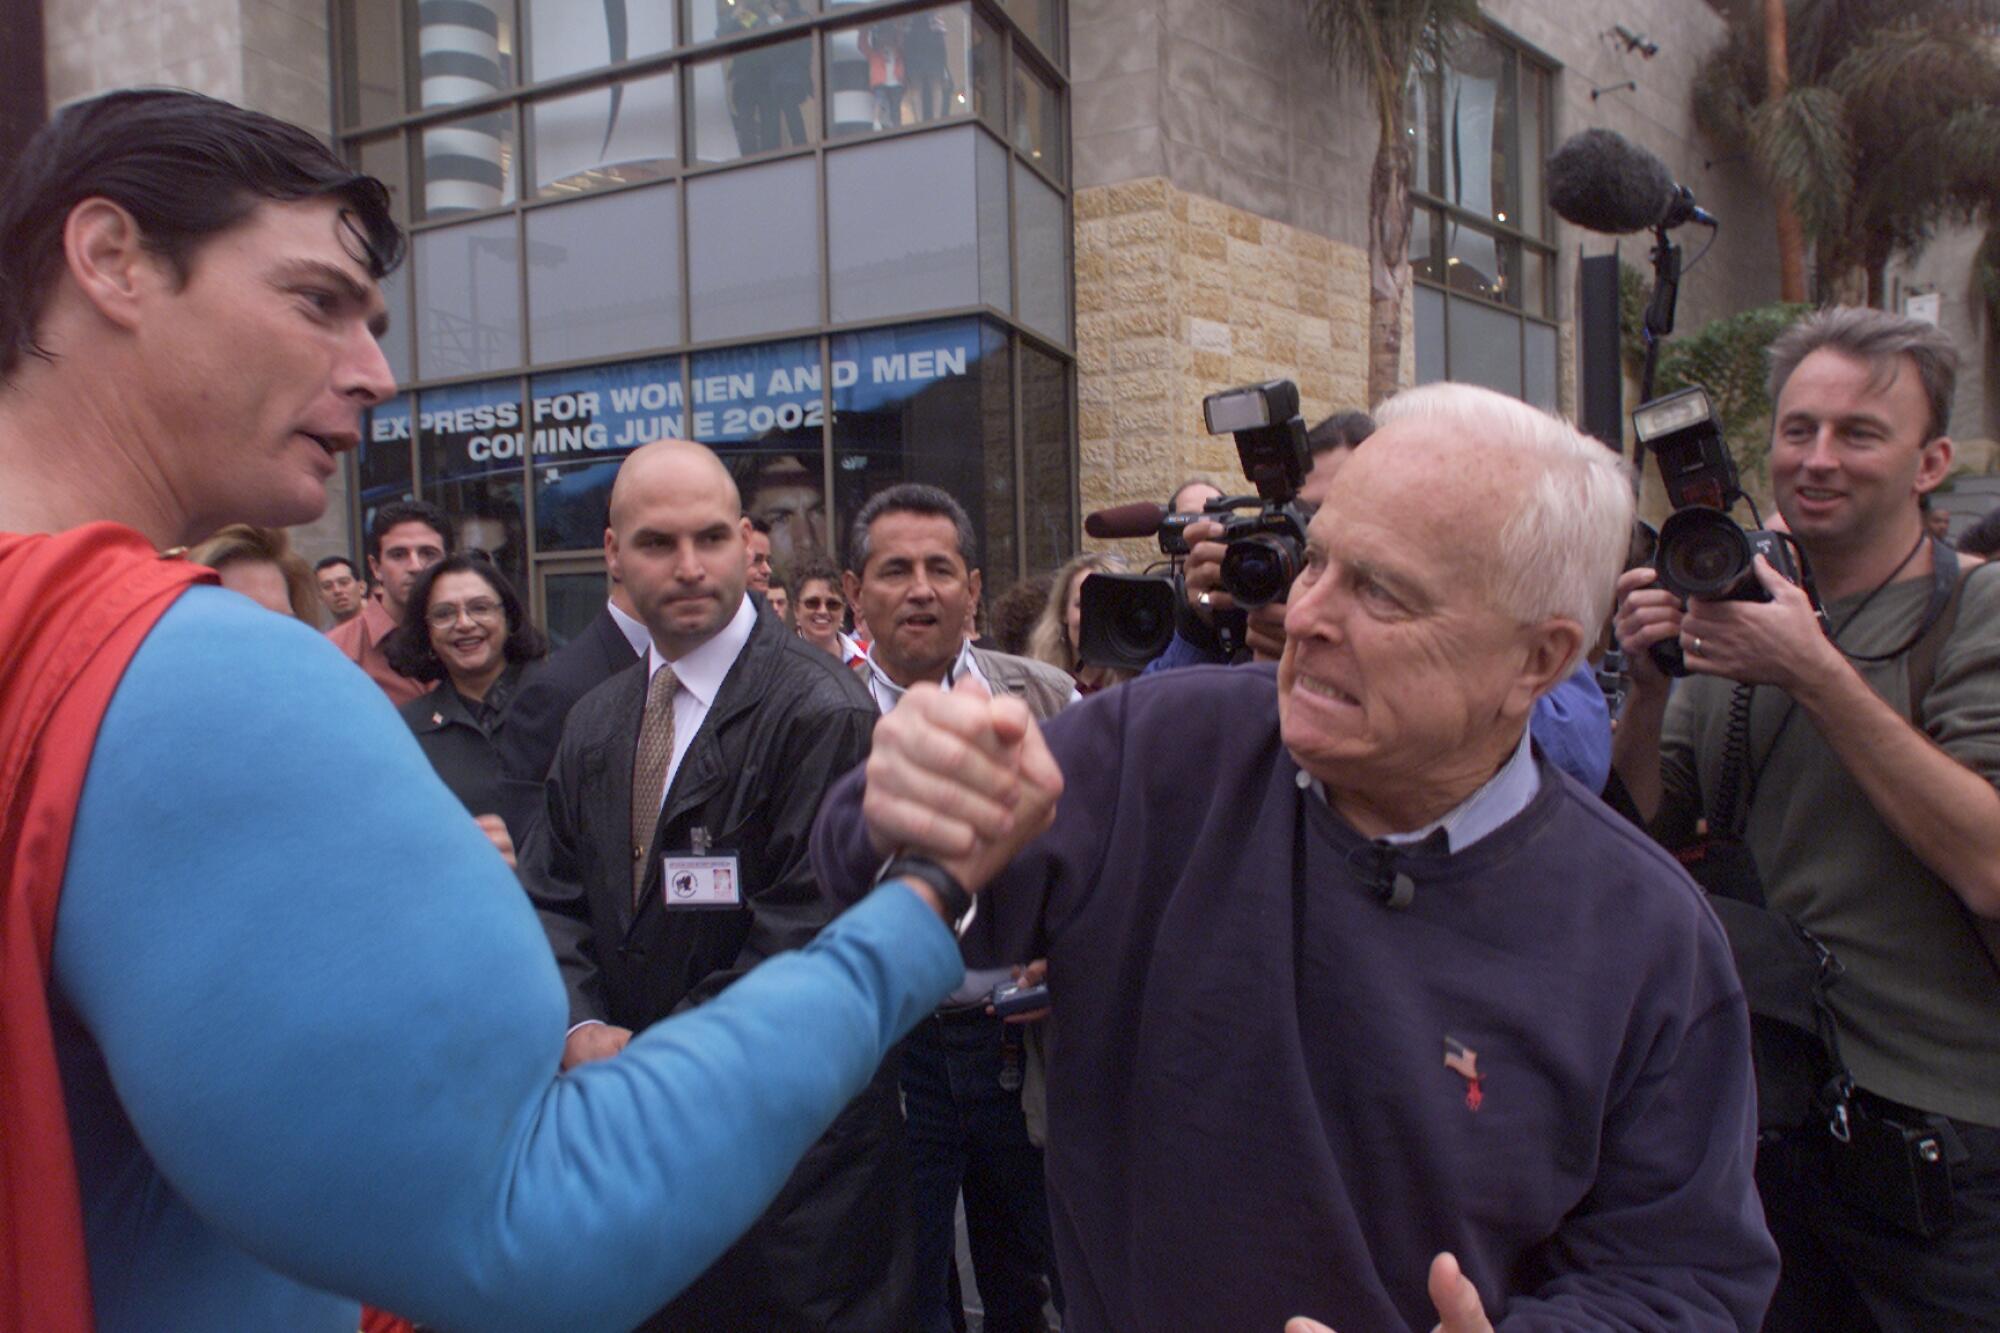 Richard Riordan pretends to arm wrestle with a man dressed in a Superman suit